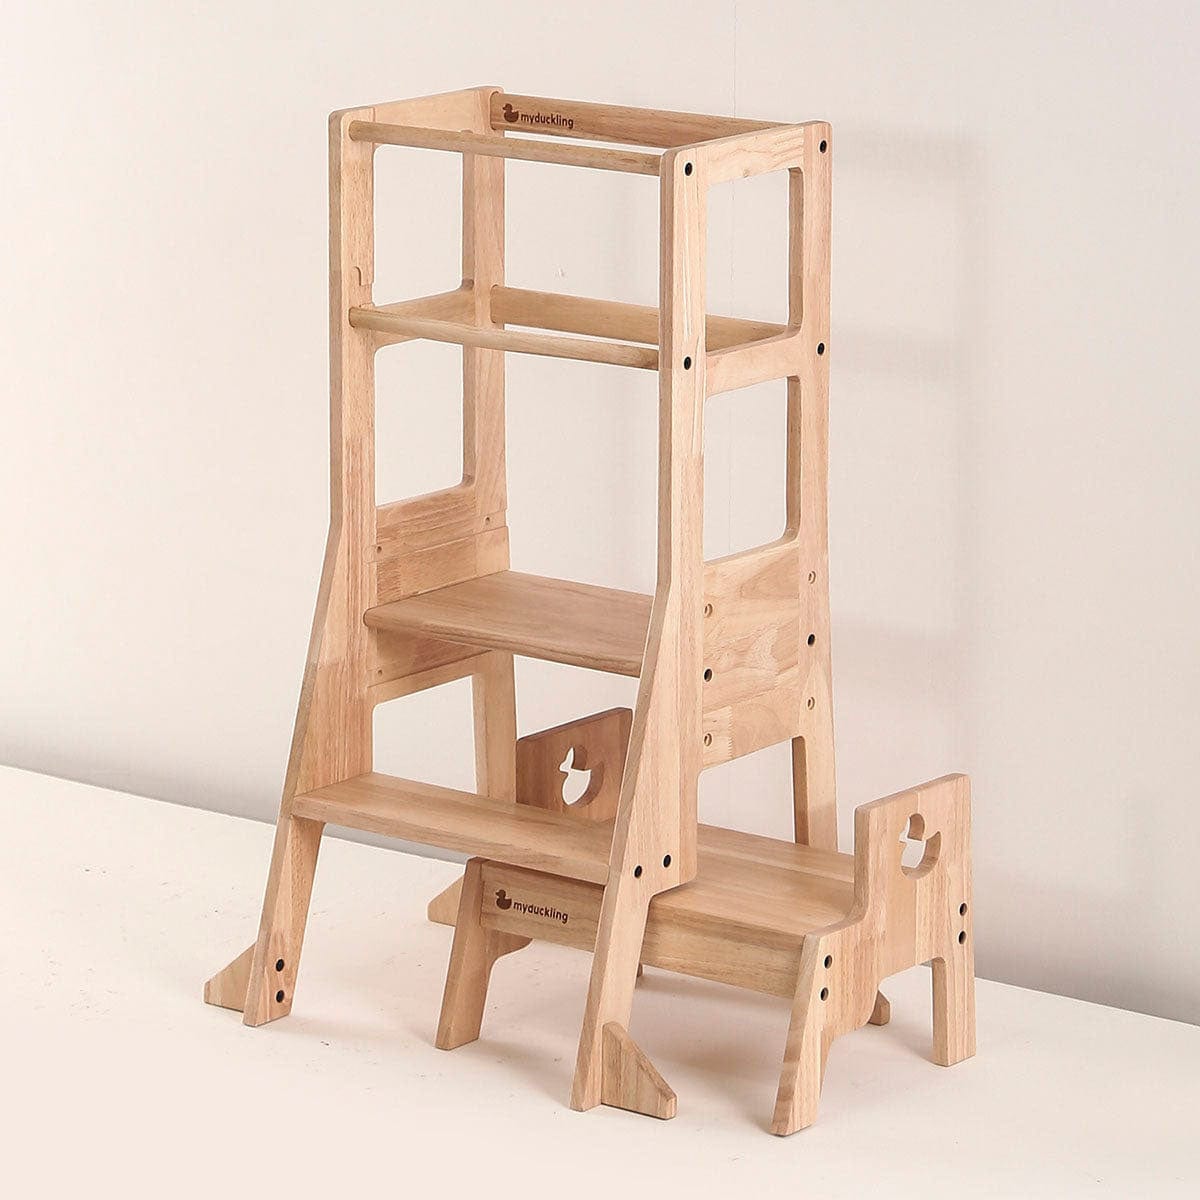 JALA Deluxe Solid Wood Adjustable Learning Tower - Duck Stool Handle